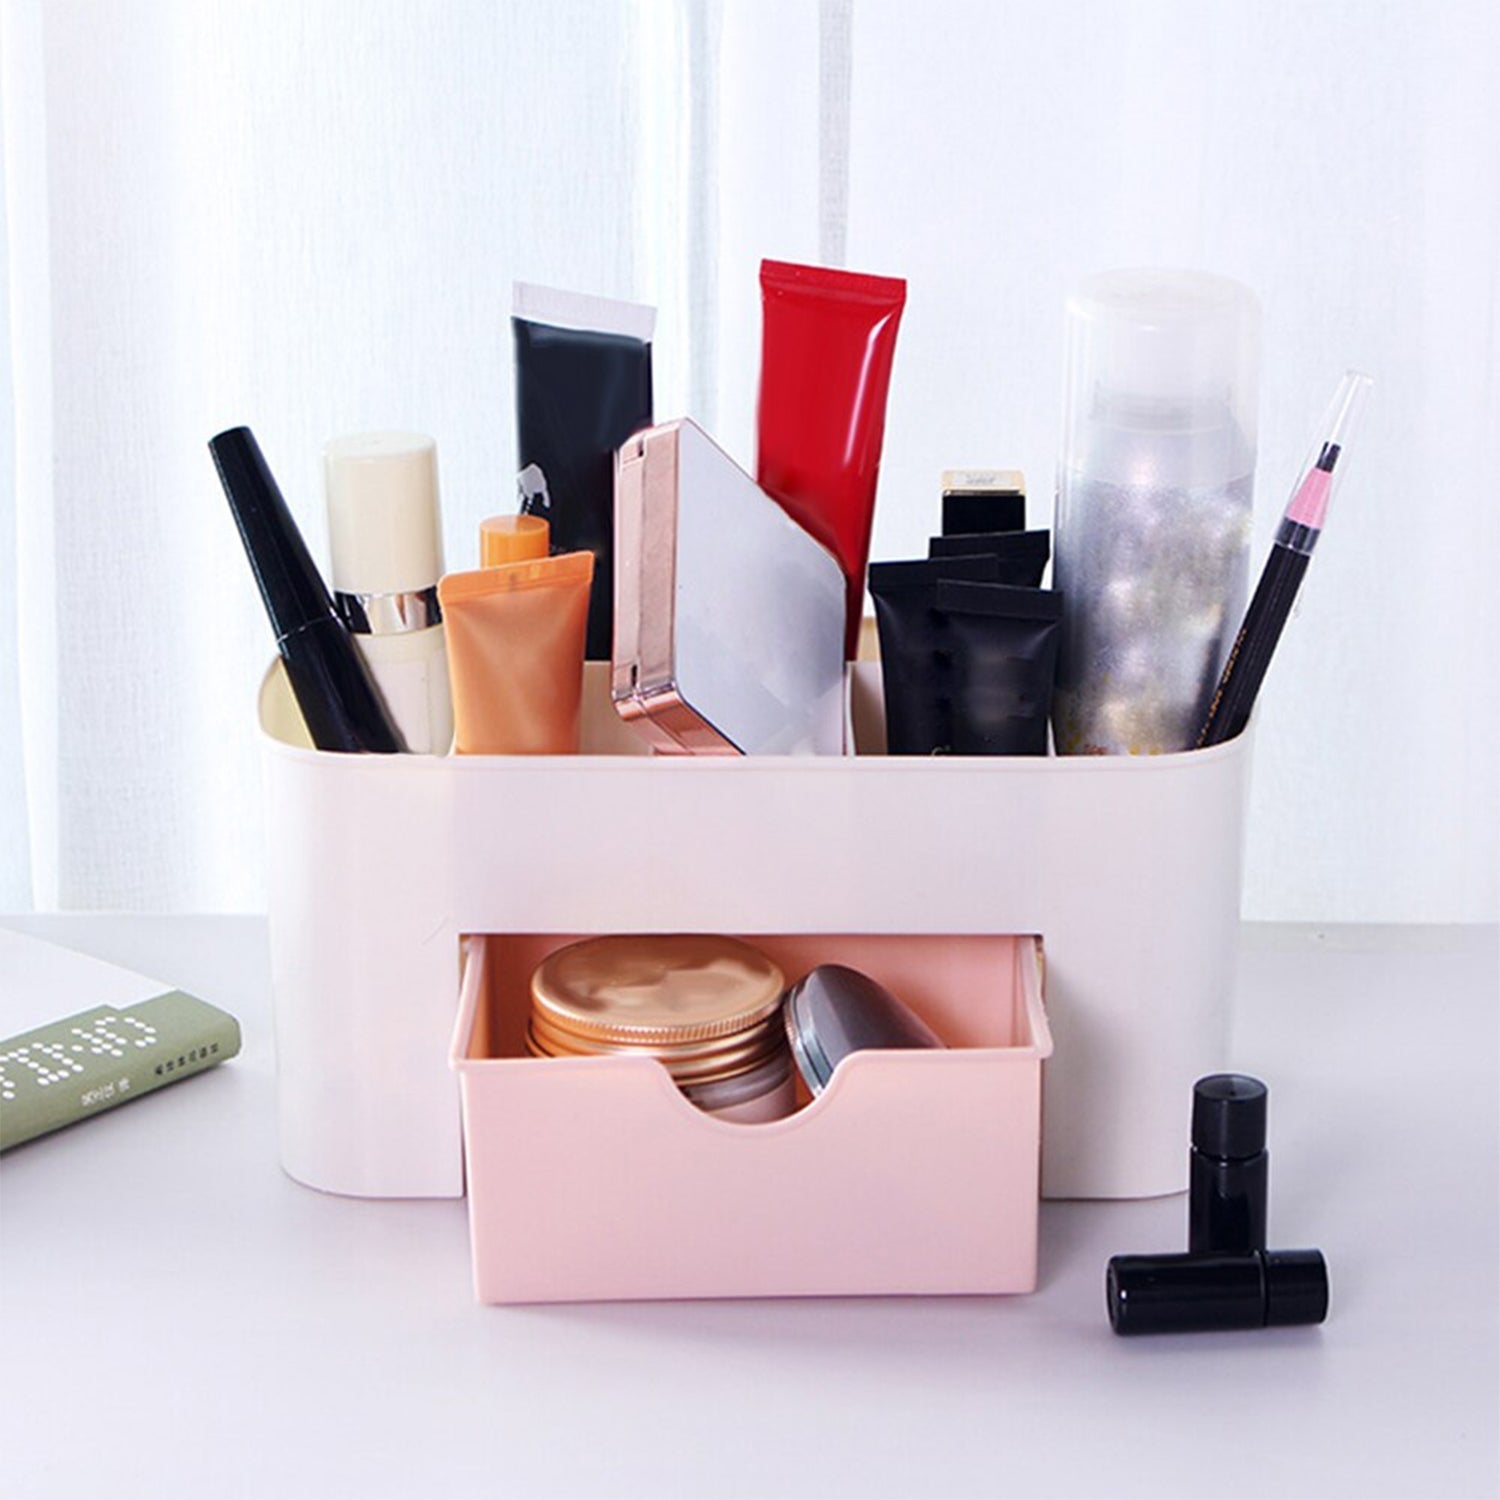 6114 Makeup Cutlery Box Used for storing makeup equipments and kits used by womens and ladies.